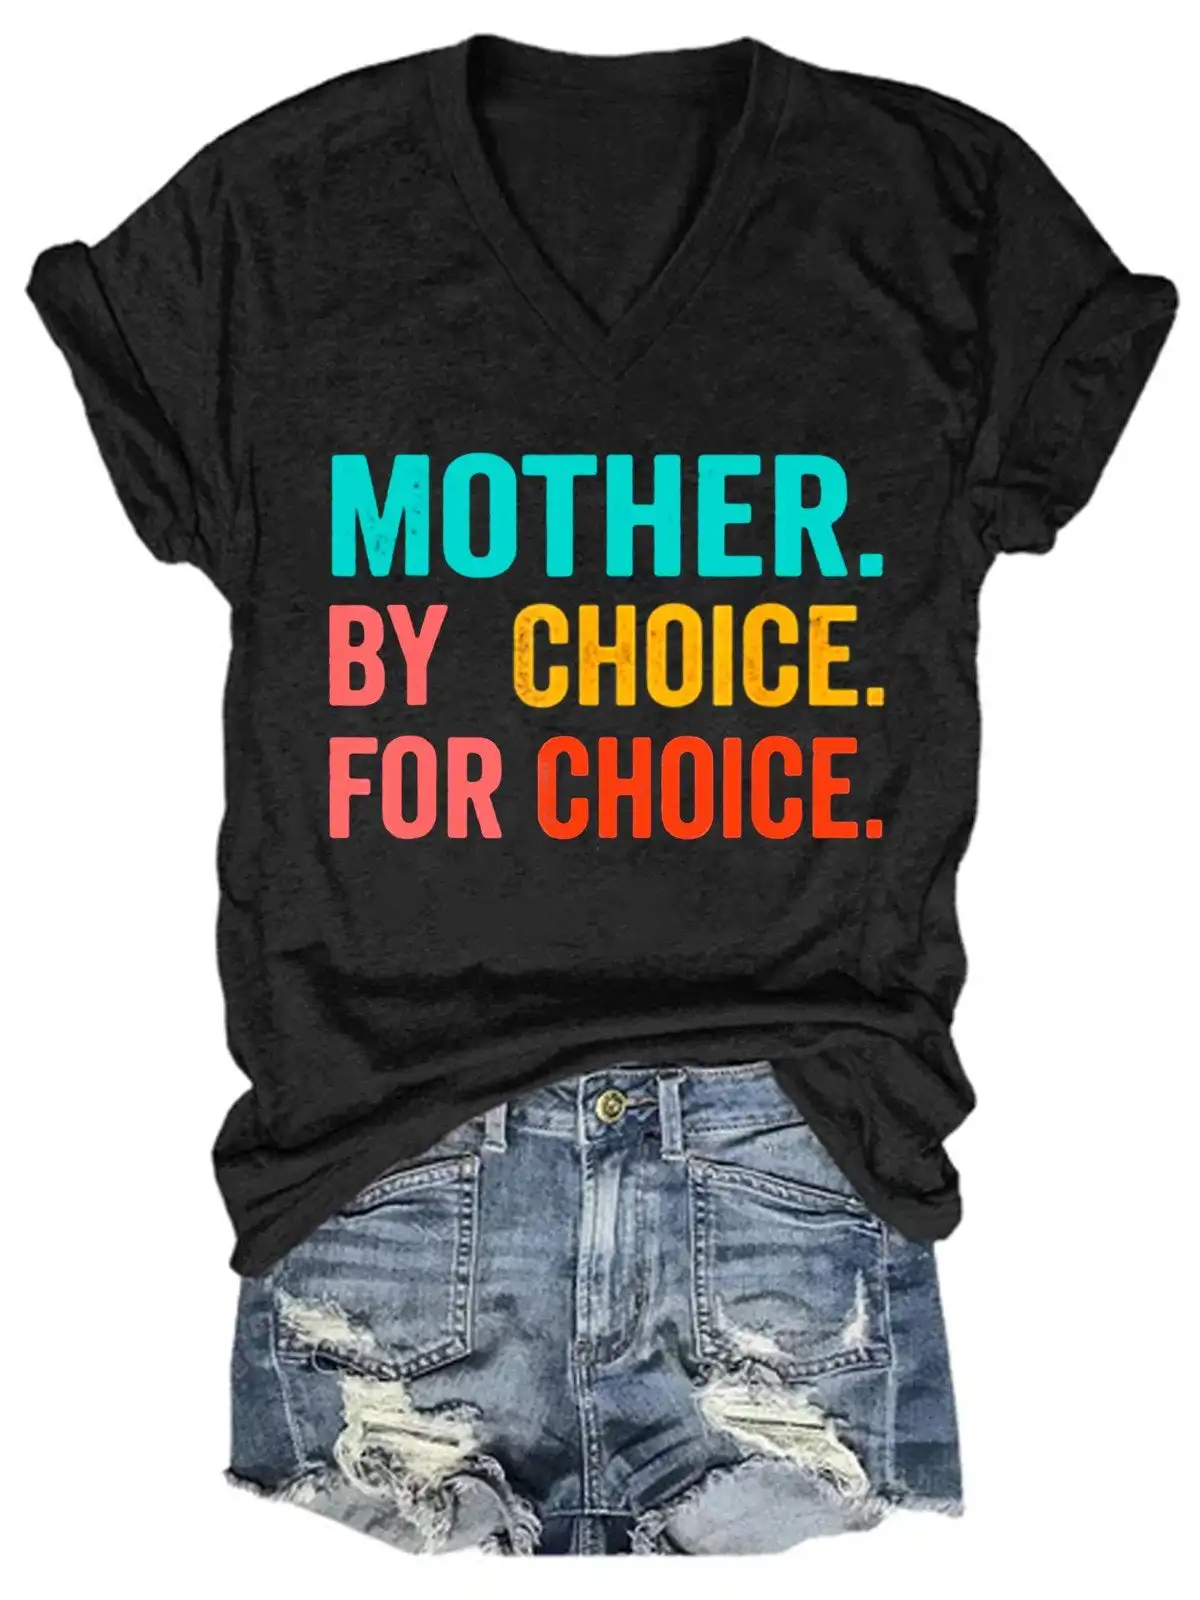 Women's Mother By Choice For Choice Pro Choice Feminist Rights Funny V-Neck Tee